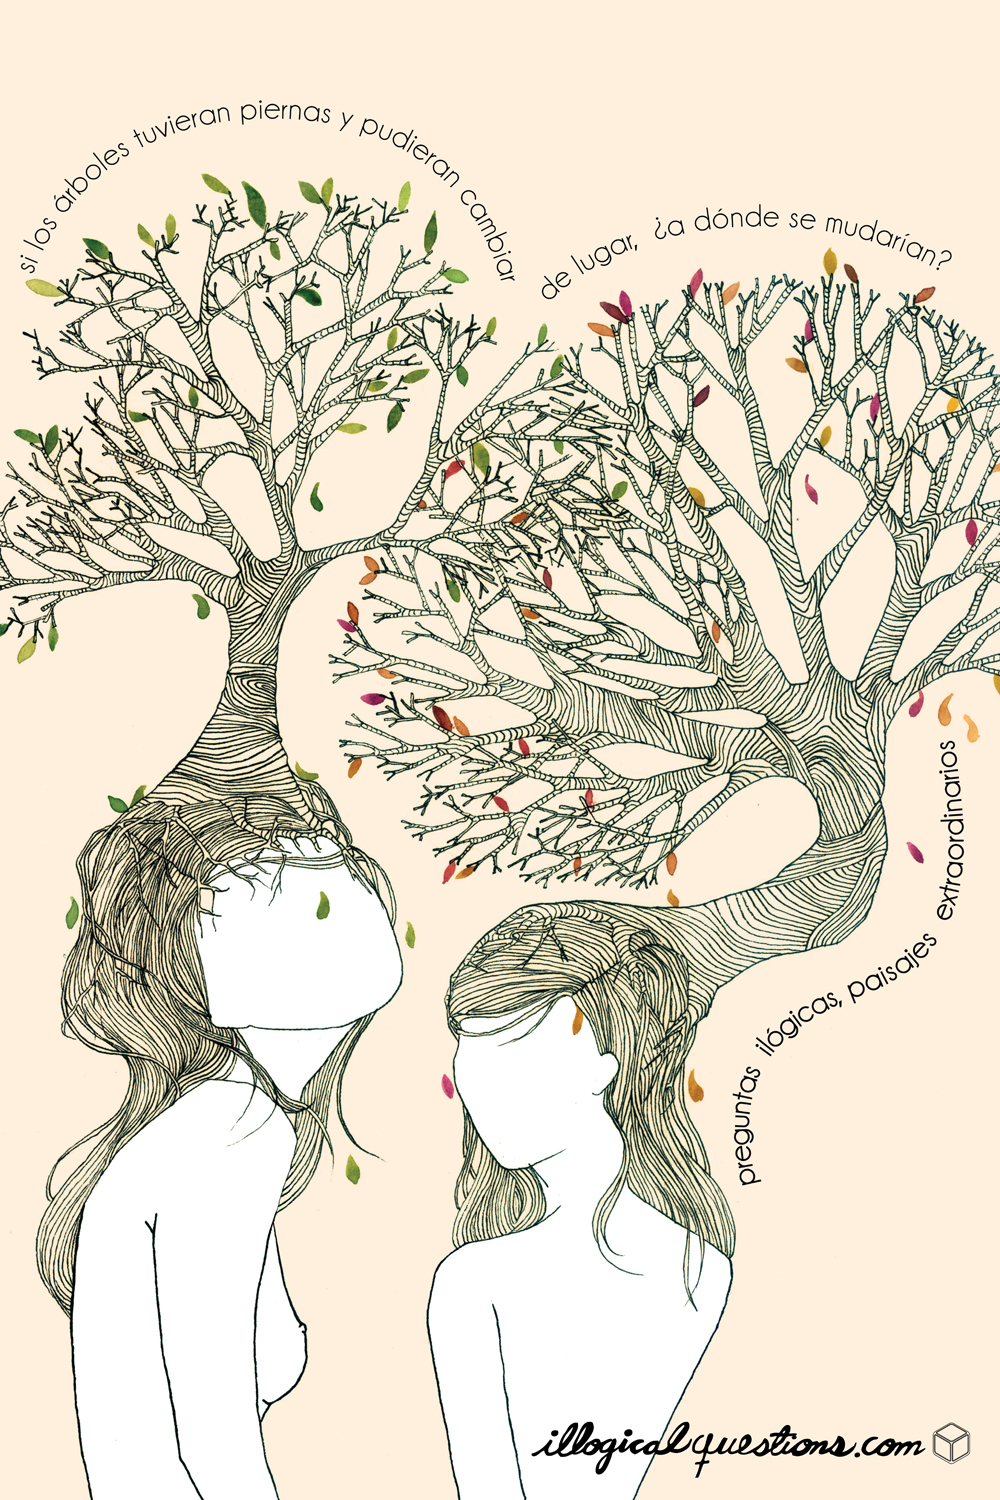 a drawing of two people with a tree on their head